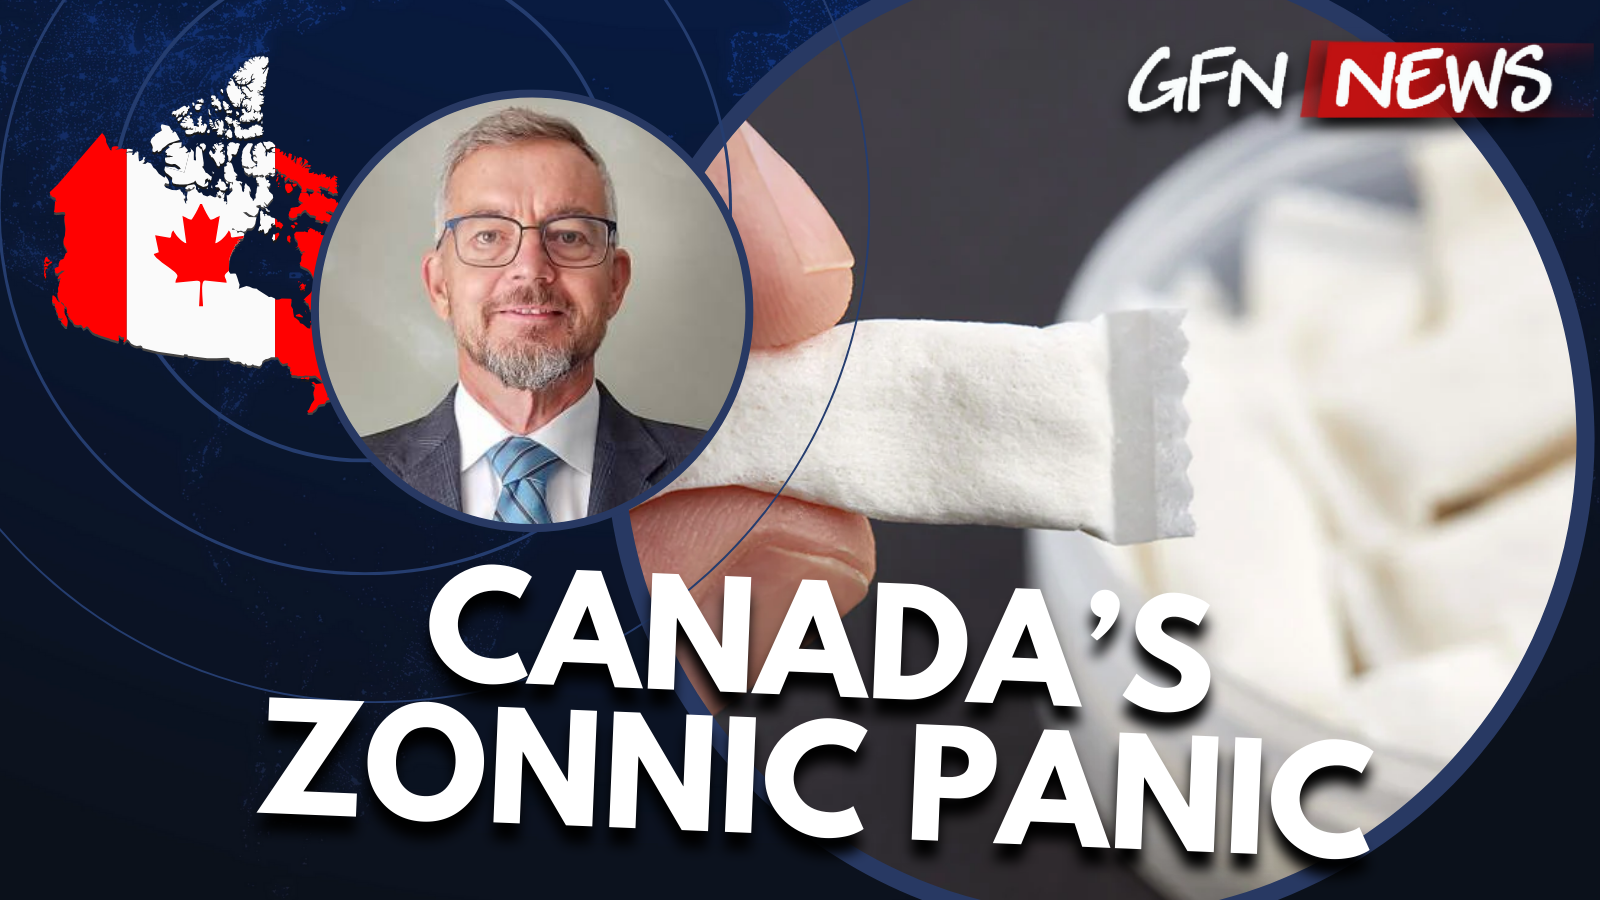 GFN News #96 | CANADA'S ZONNIC PANIC | John Oyston explains Canada's Zonnic pouch controversy